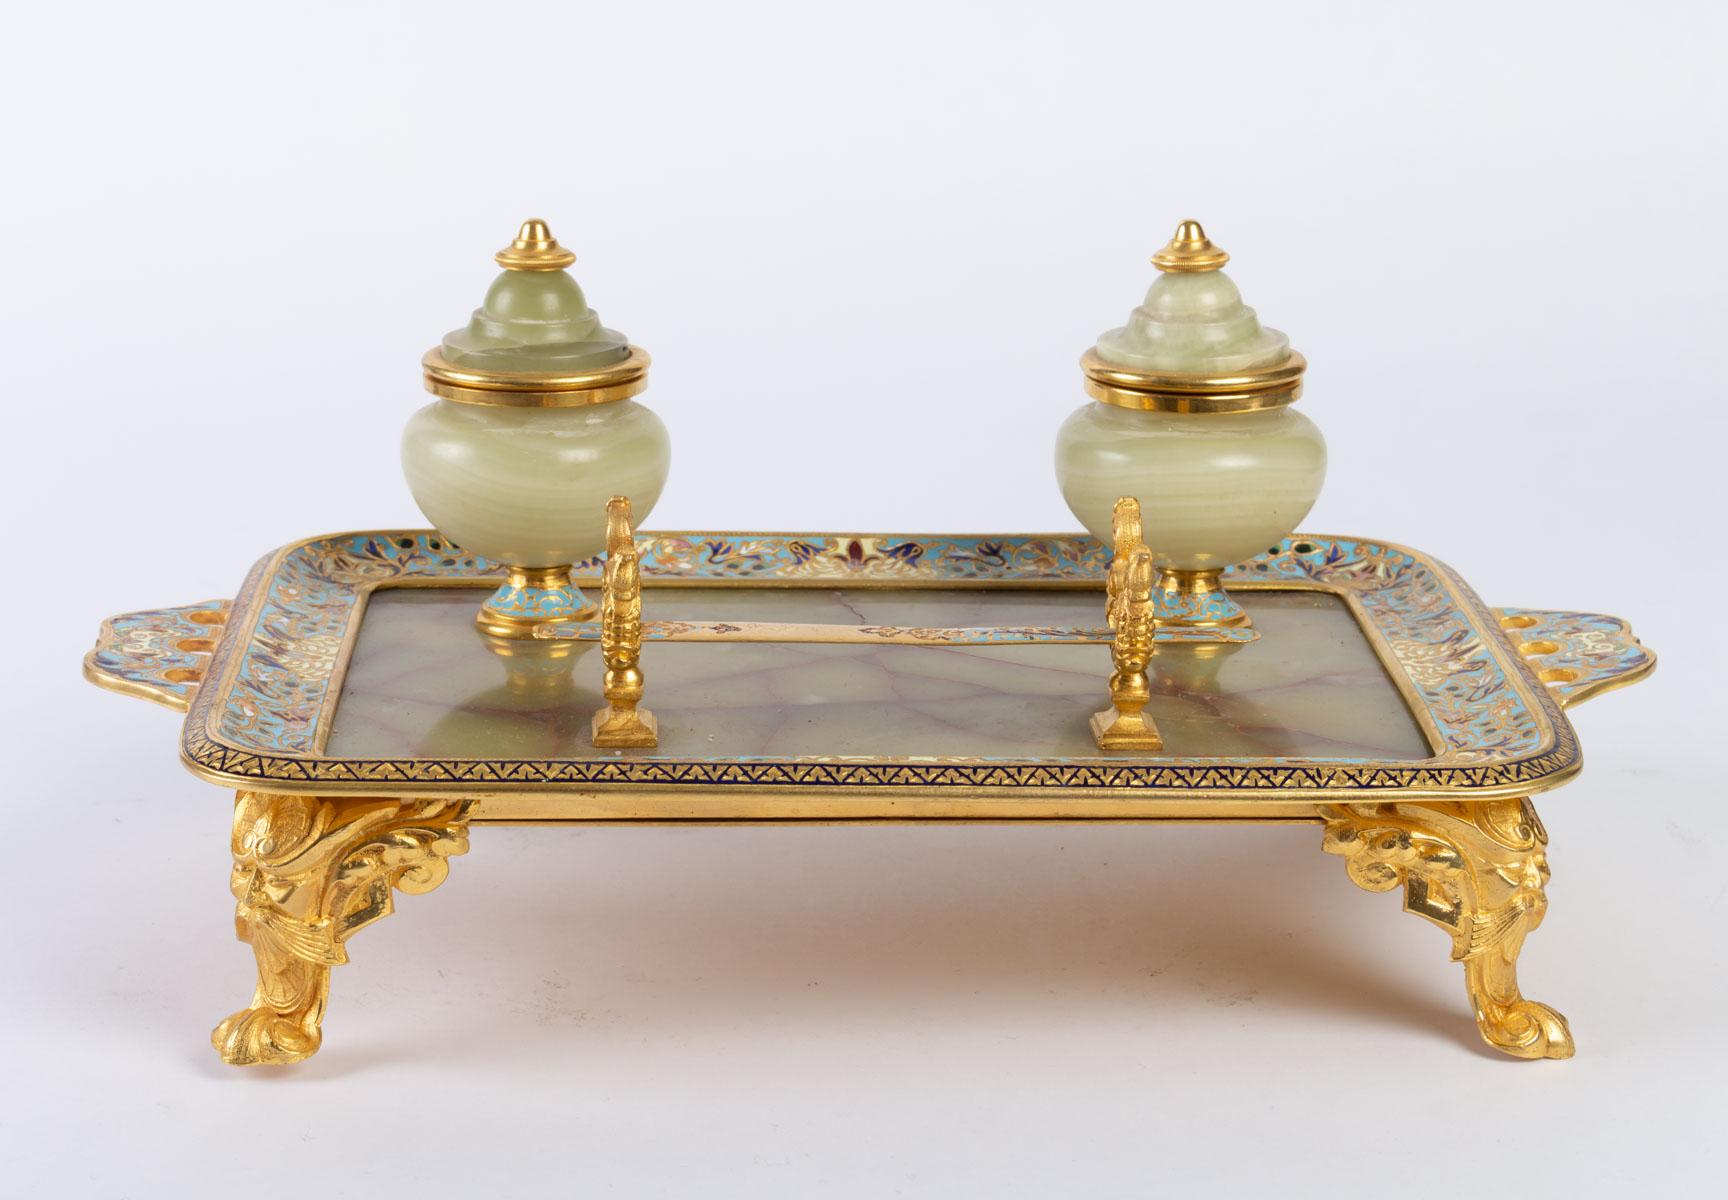 Inkwell in gilded and Cloisonné bronze and onyx, 19th century, Napoleone III period.

Measures: H 17 cm, W 37 cm, D 22 cm.